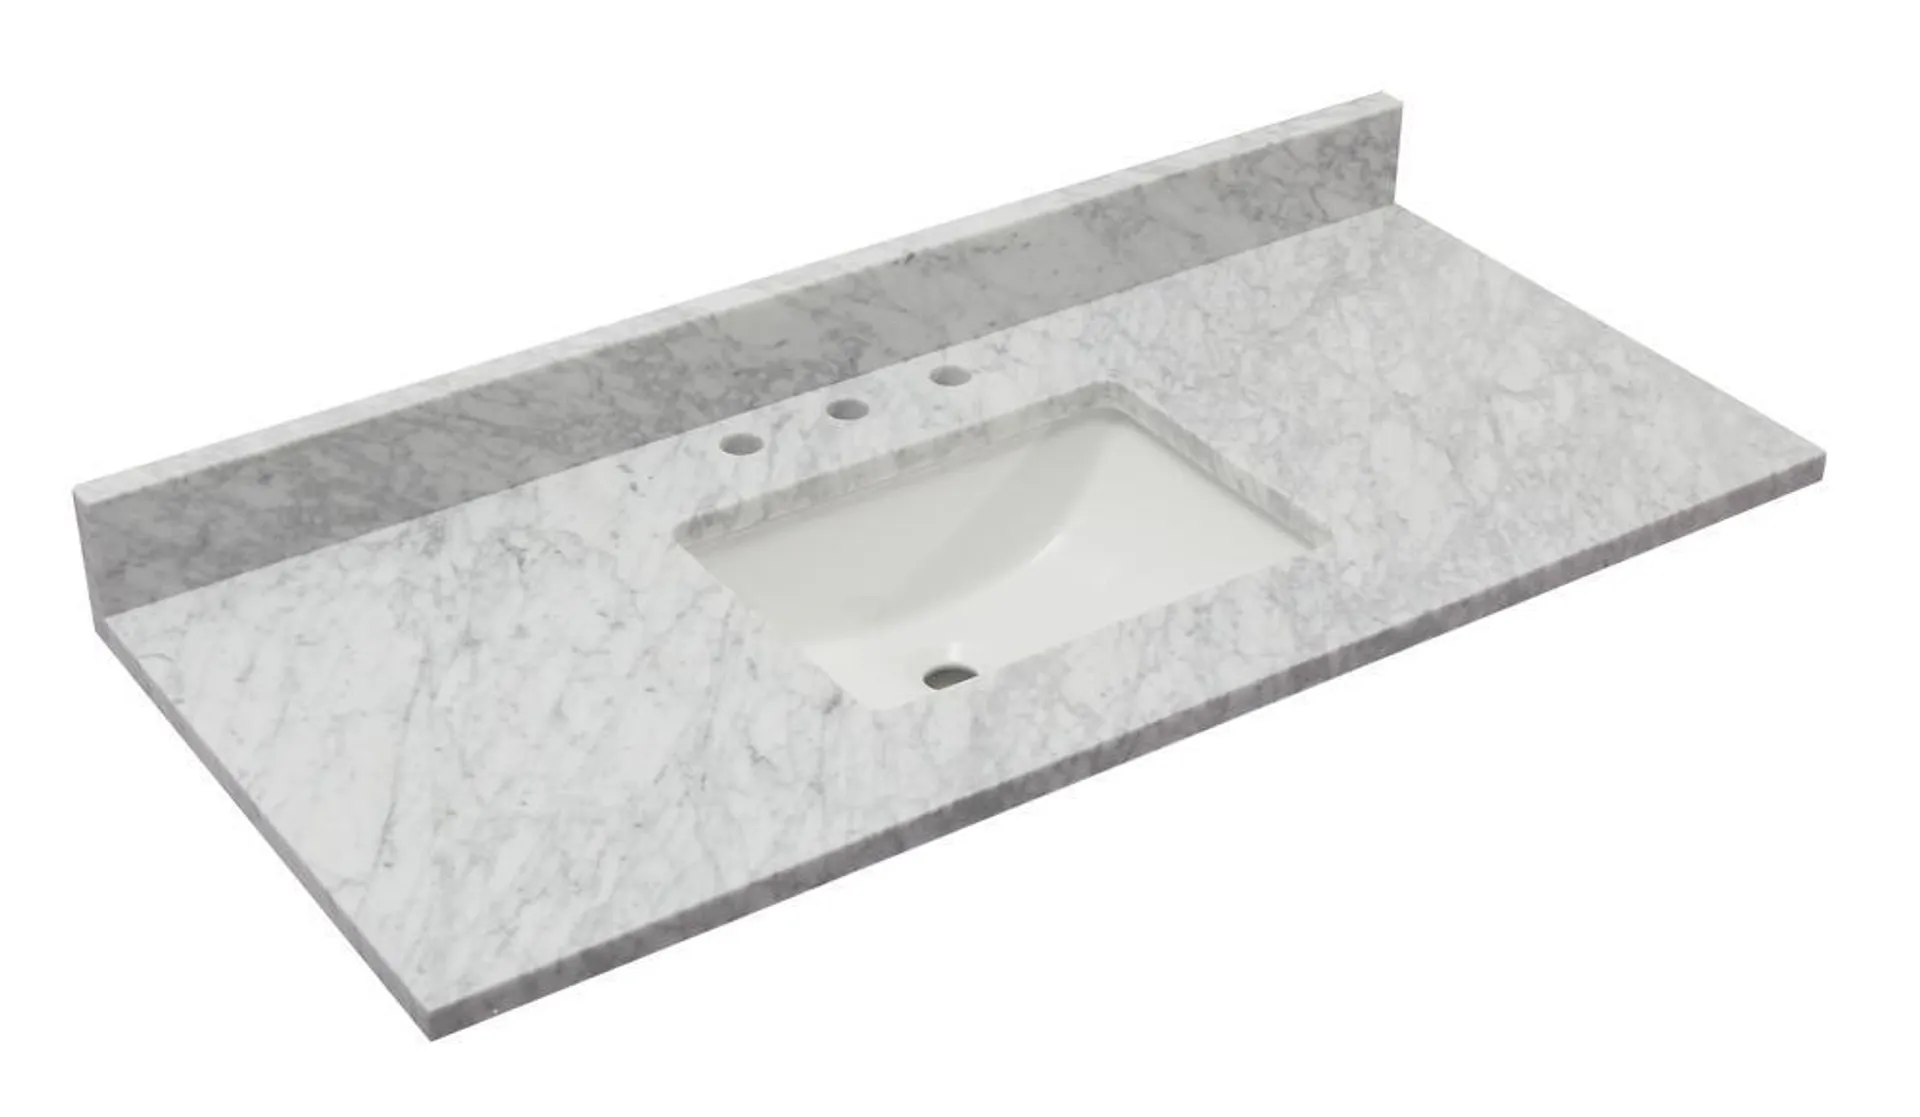 Tuscany® 49"W x 22"D Carrara Marble Vanity Top with Wave Rectangular Undermount Bowl